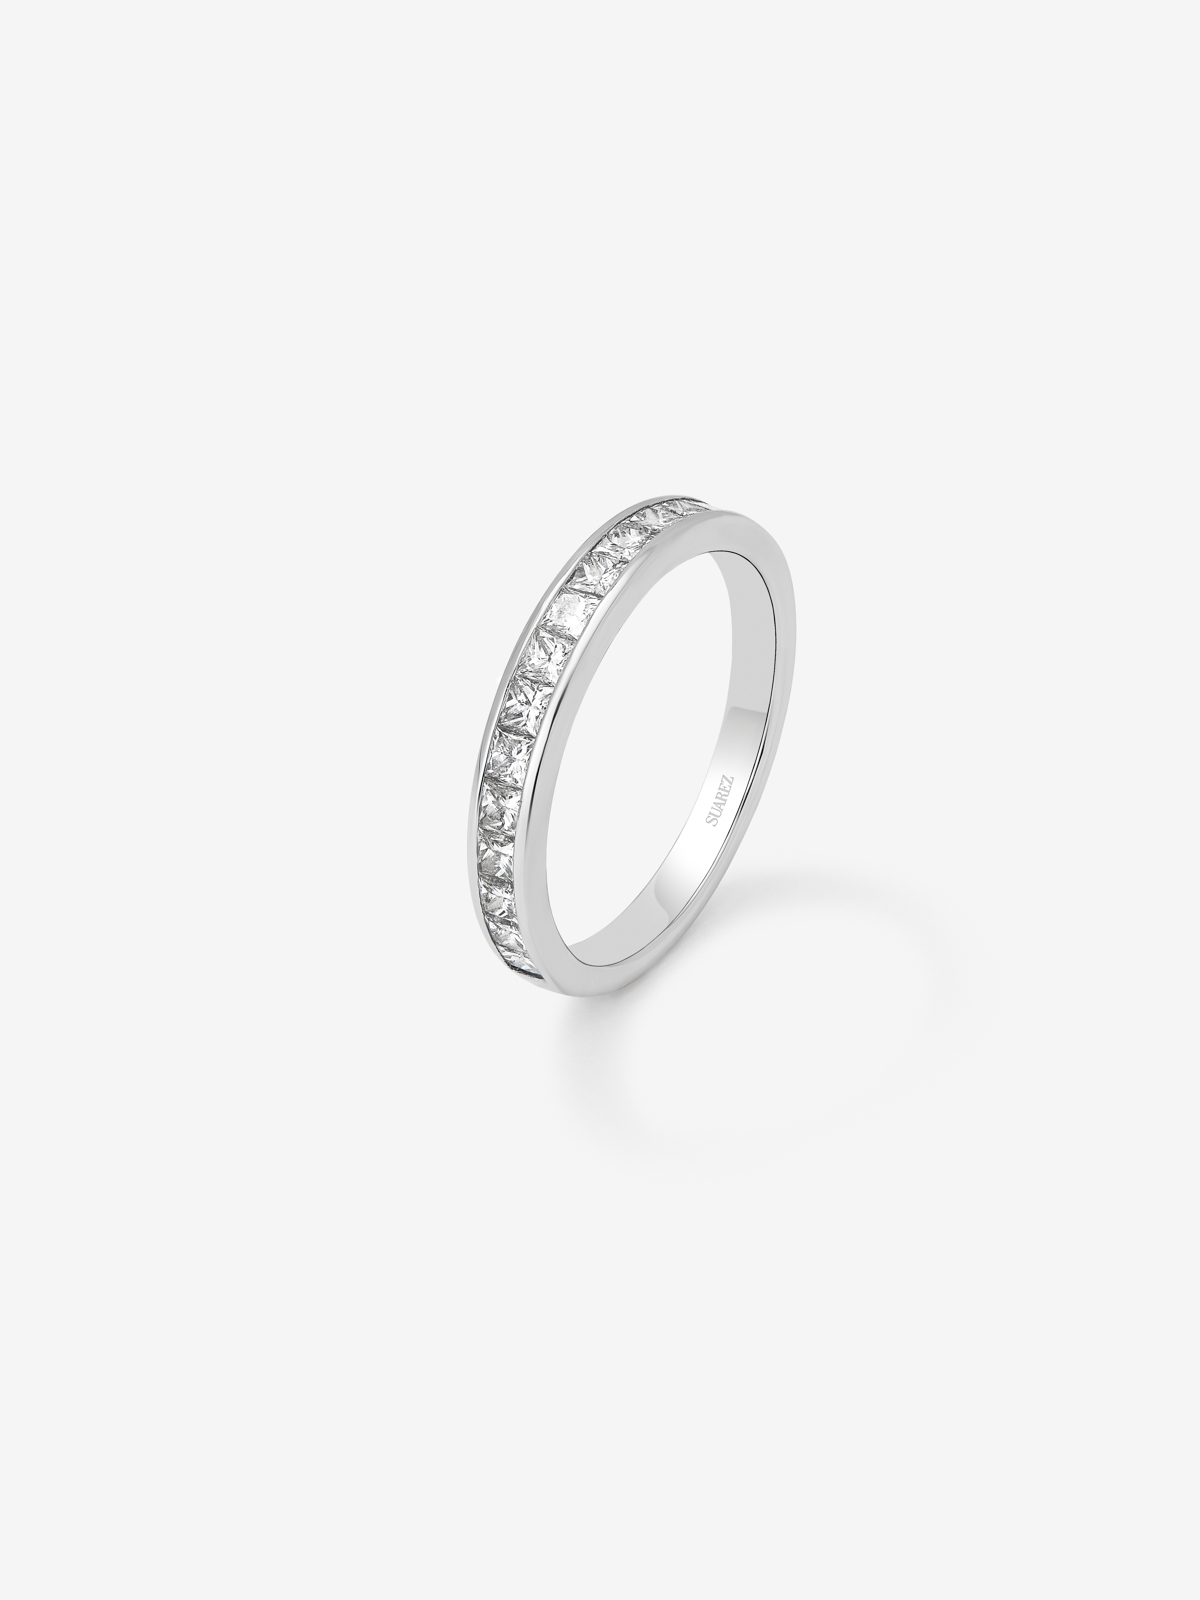 Half eternity engagement ring in 18K white gold with princess cut diamonds on a 0.70ct rail.